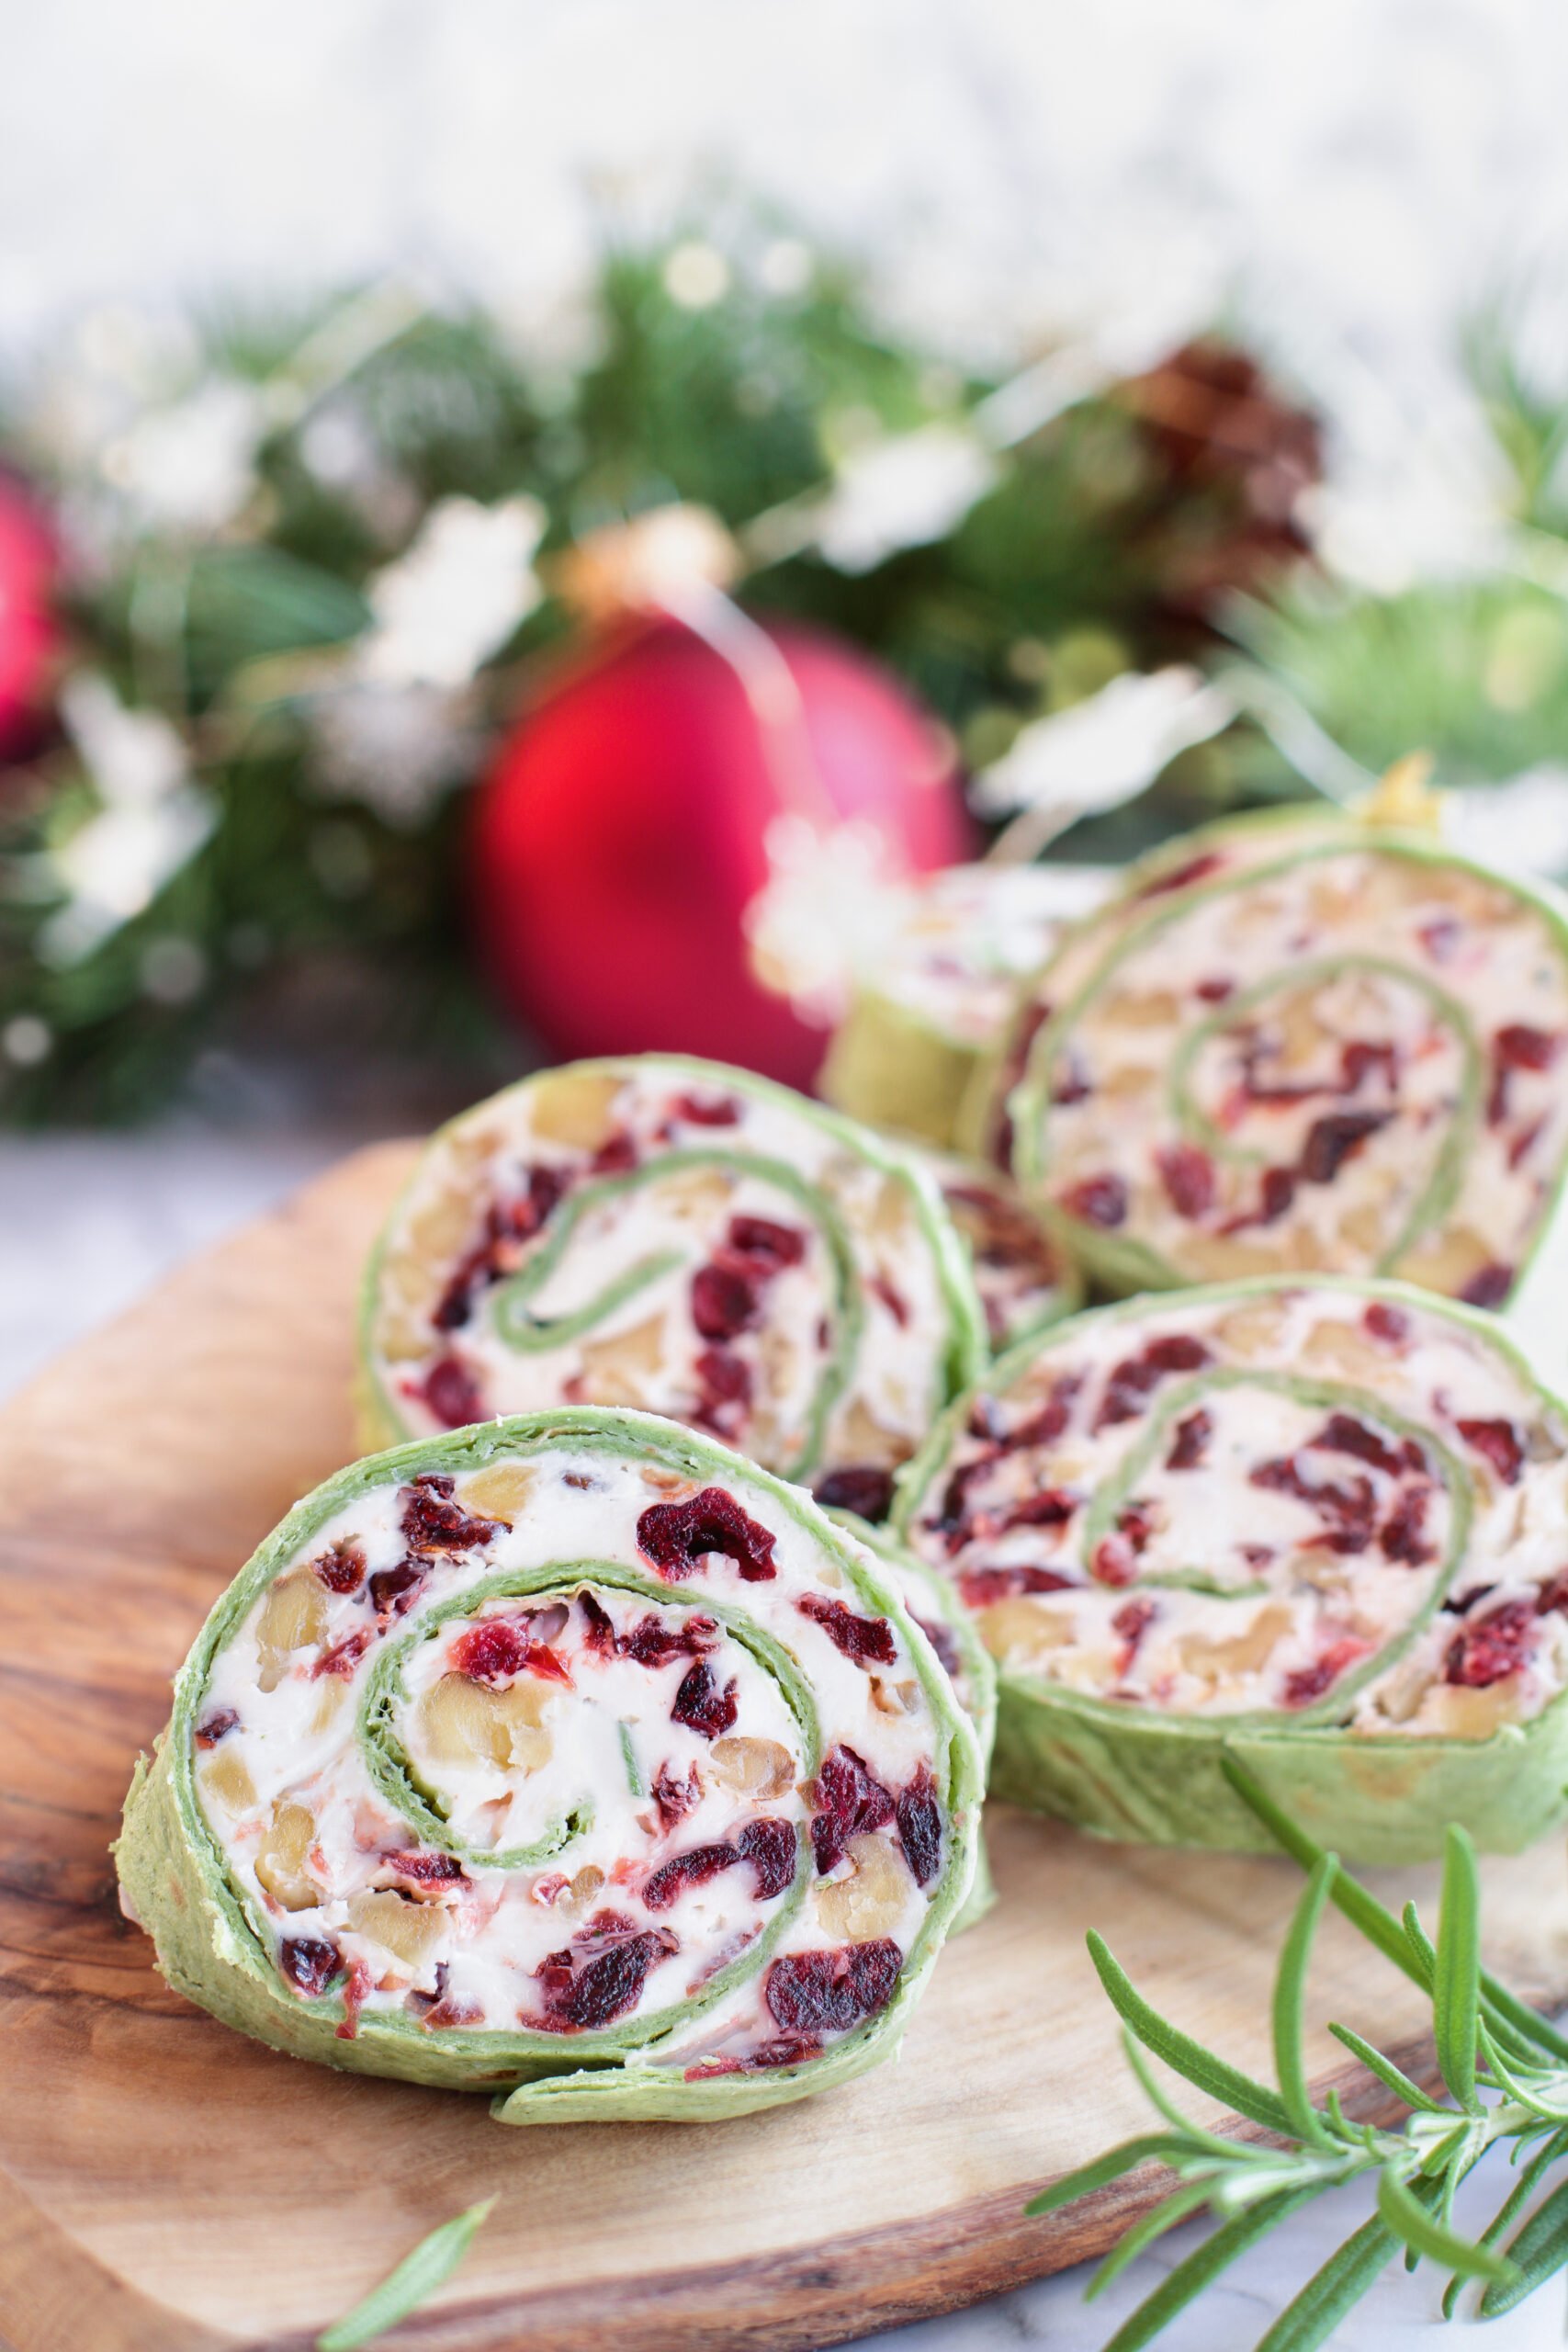 These Cranberry Walnut Pinwheels are the perfect make ahead Christmas appetizer or snack. Sweet feeling with dried cranberries, with the crunch of walnuts all mixed in a creamy filling!